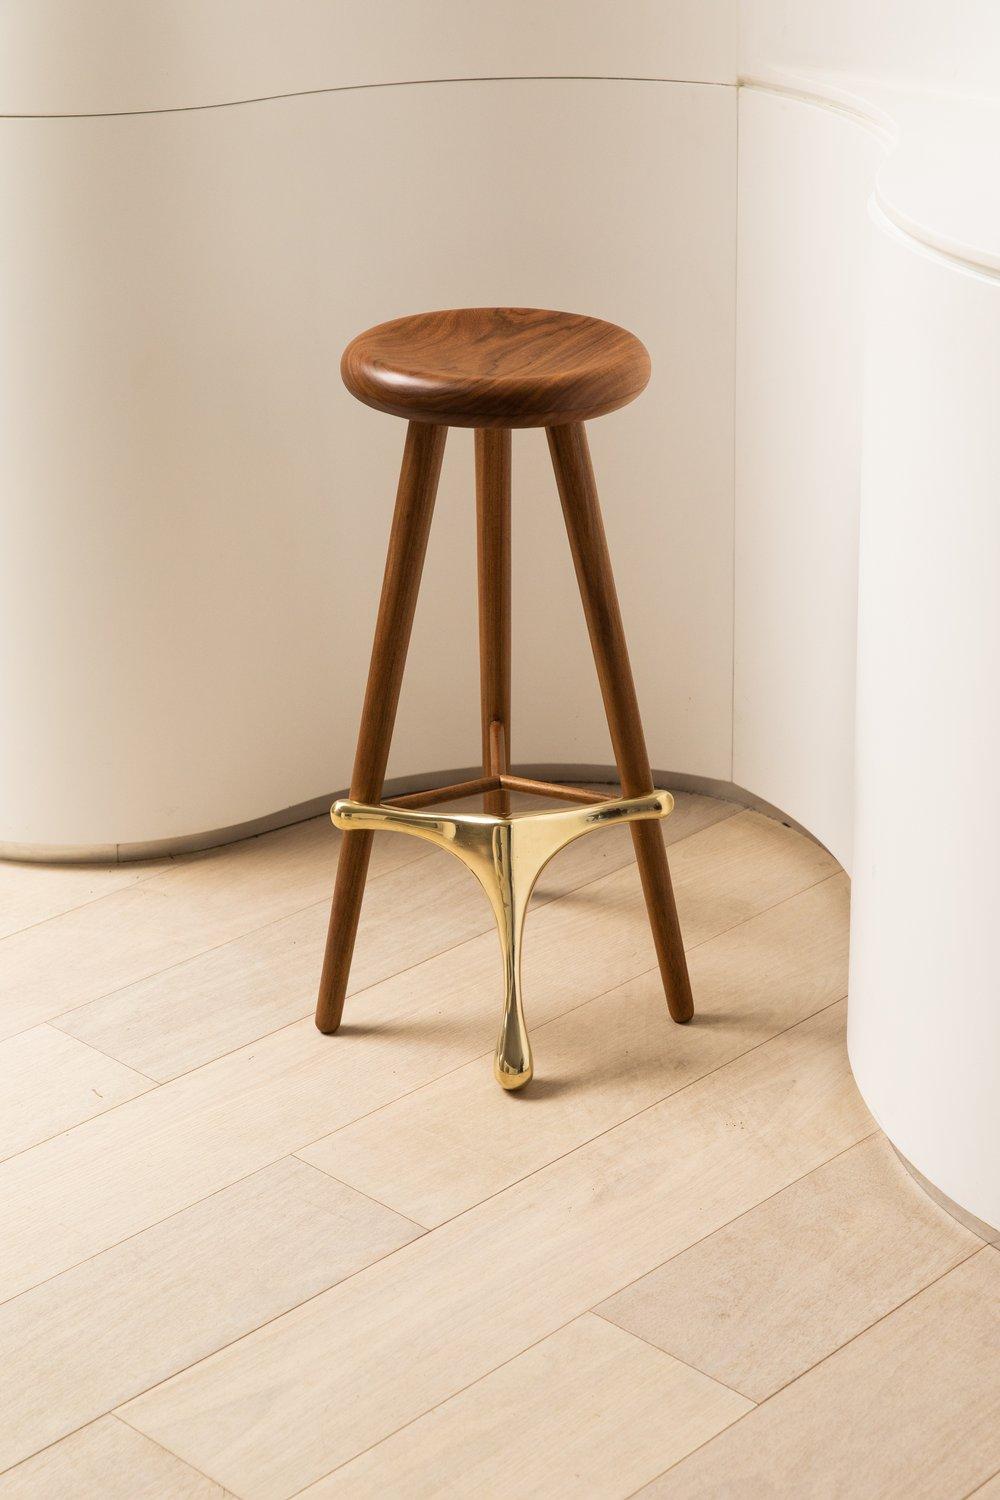 Amparo Freijó and Bronze Tall Stool by Alva Design
Materials: solid wood (Freijó) and cast bronze.
Dimensions: W 37 x D 48 x H 73 cm.

Available in different wood options (Braúna or Freijó solid wood) and footrest options (solid wood, iron or